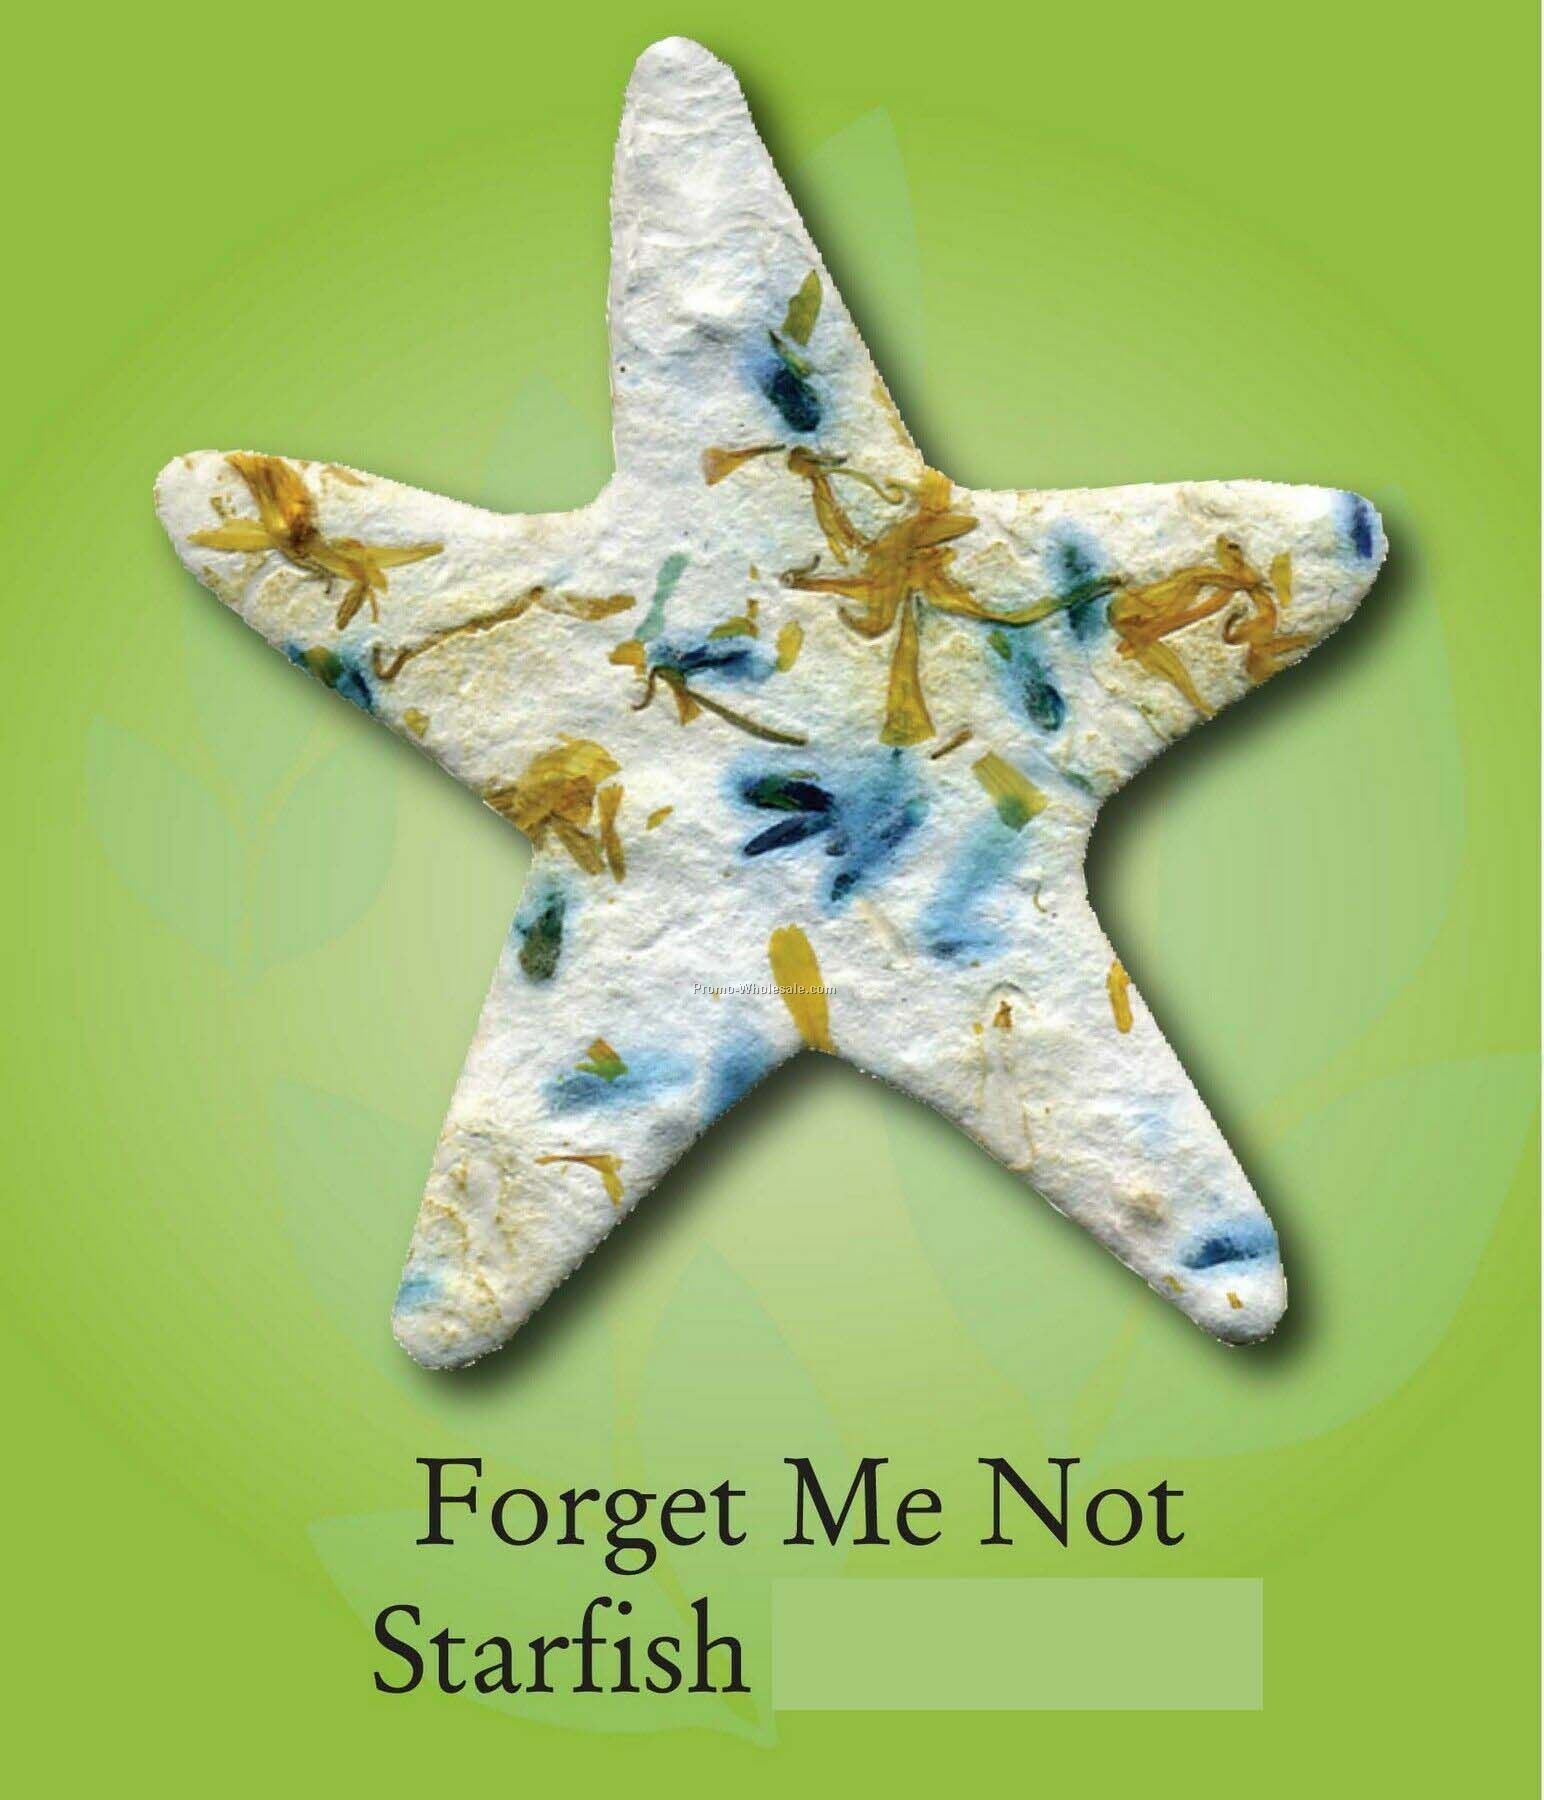 Forget Me Not Starfish Ornament W/ Embedded Seed